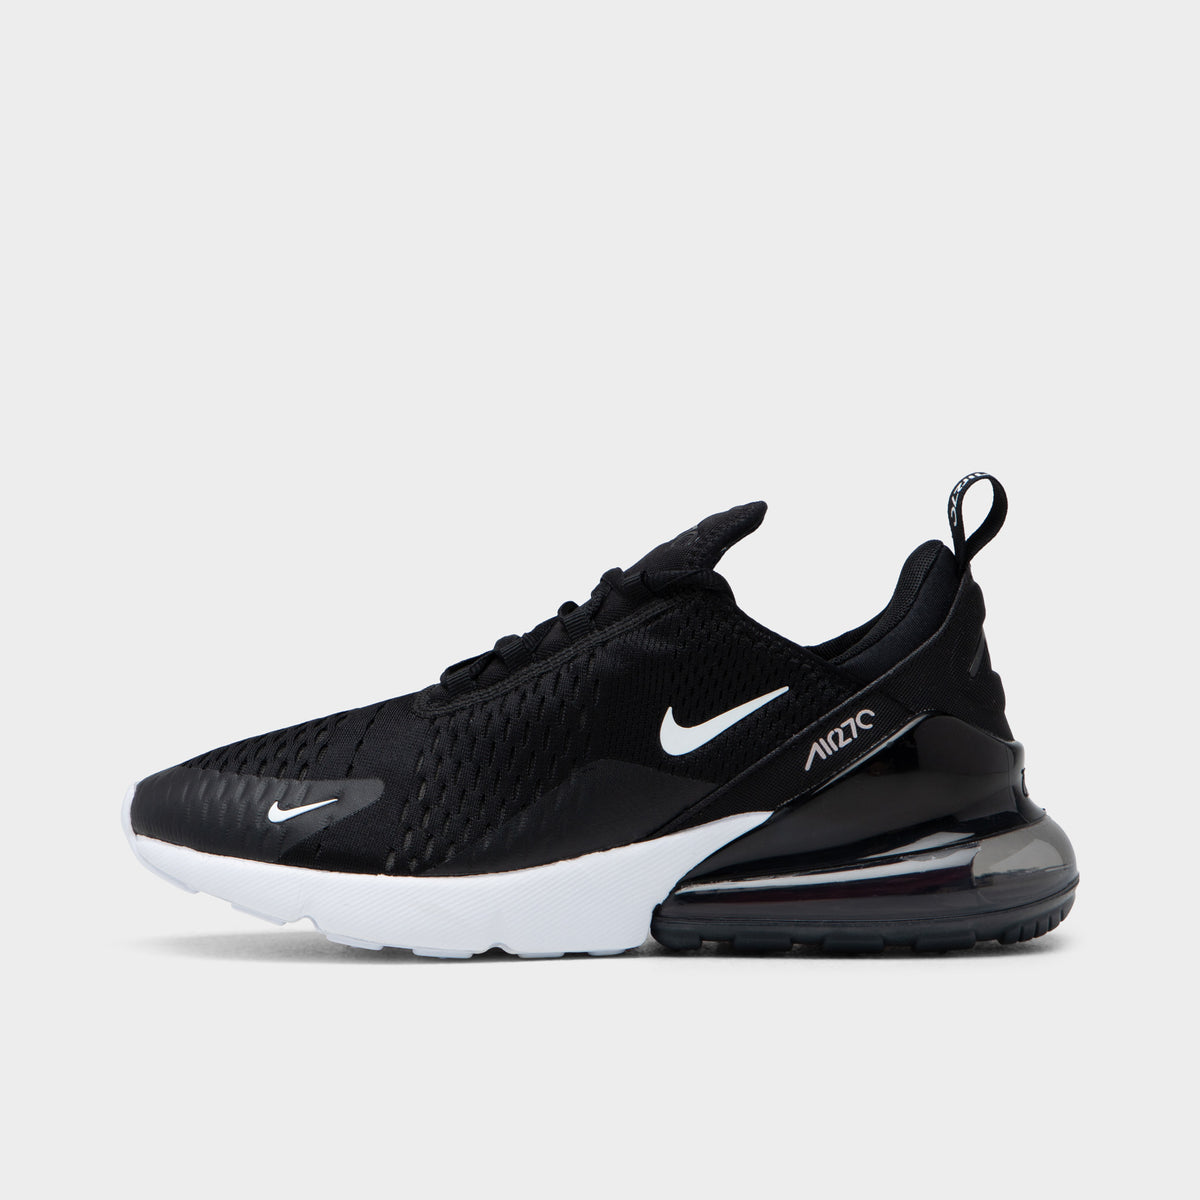 Nike Air Max 270 Black / Anthracite - Solar Red | JD Sports Canada